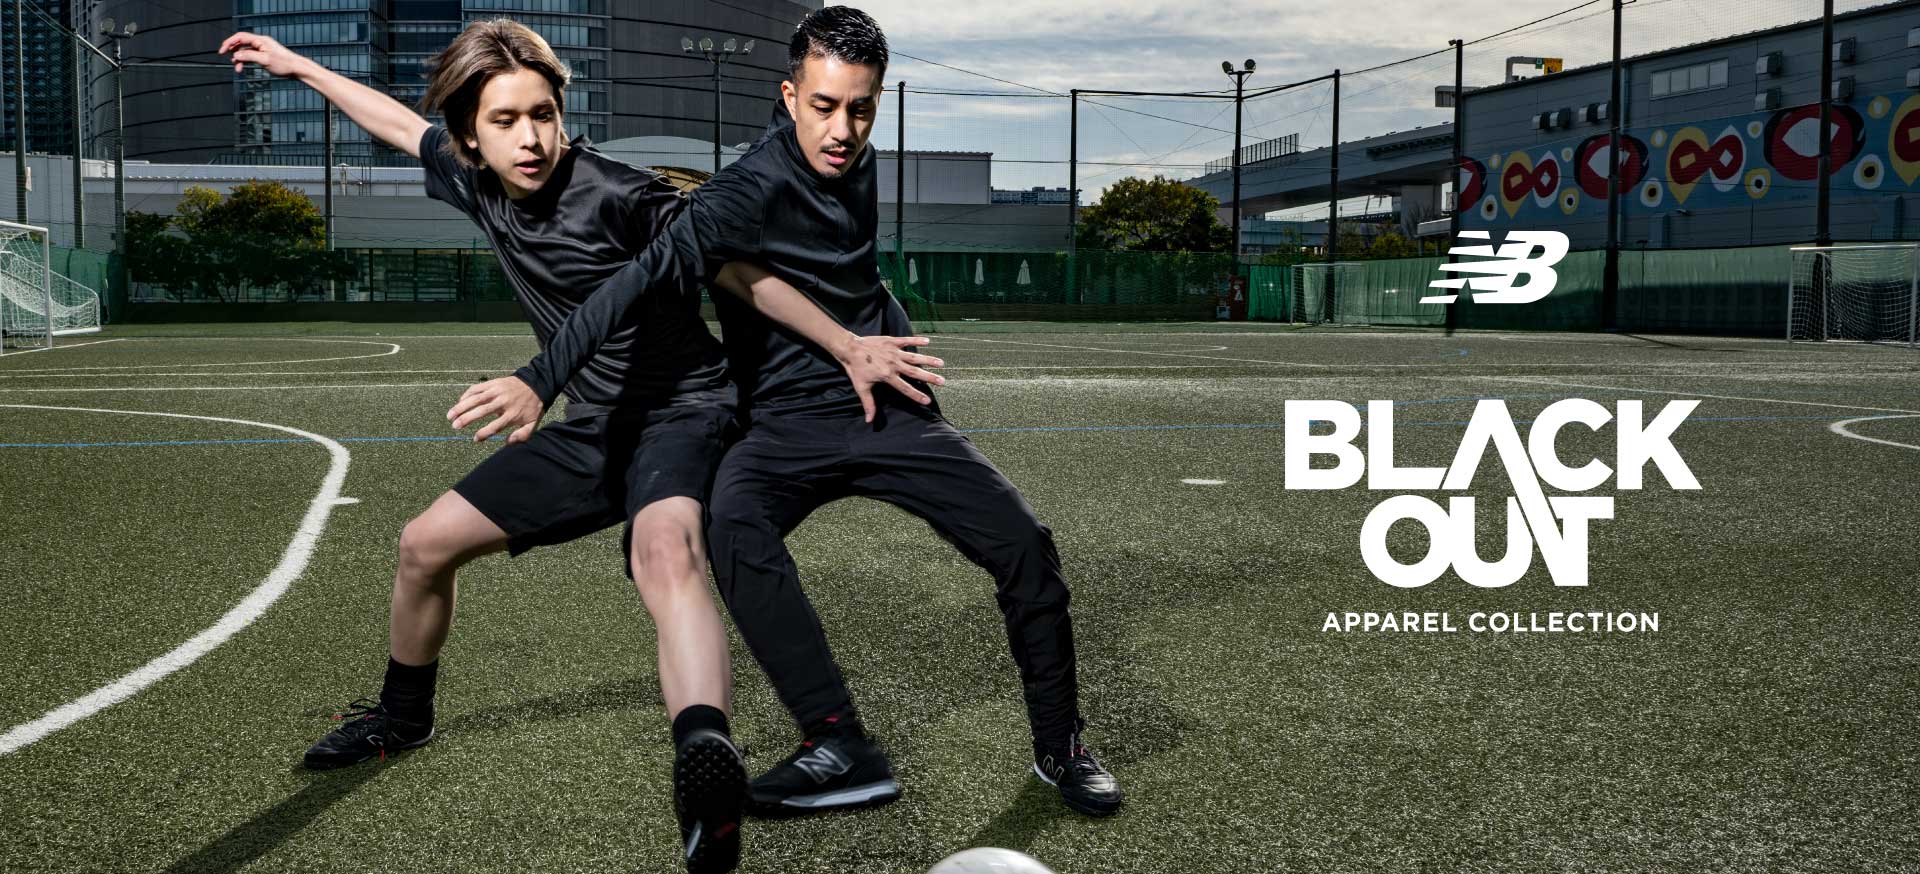 Blackout Apparel Collection | Football/Soccer